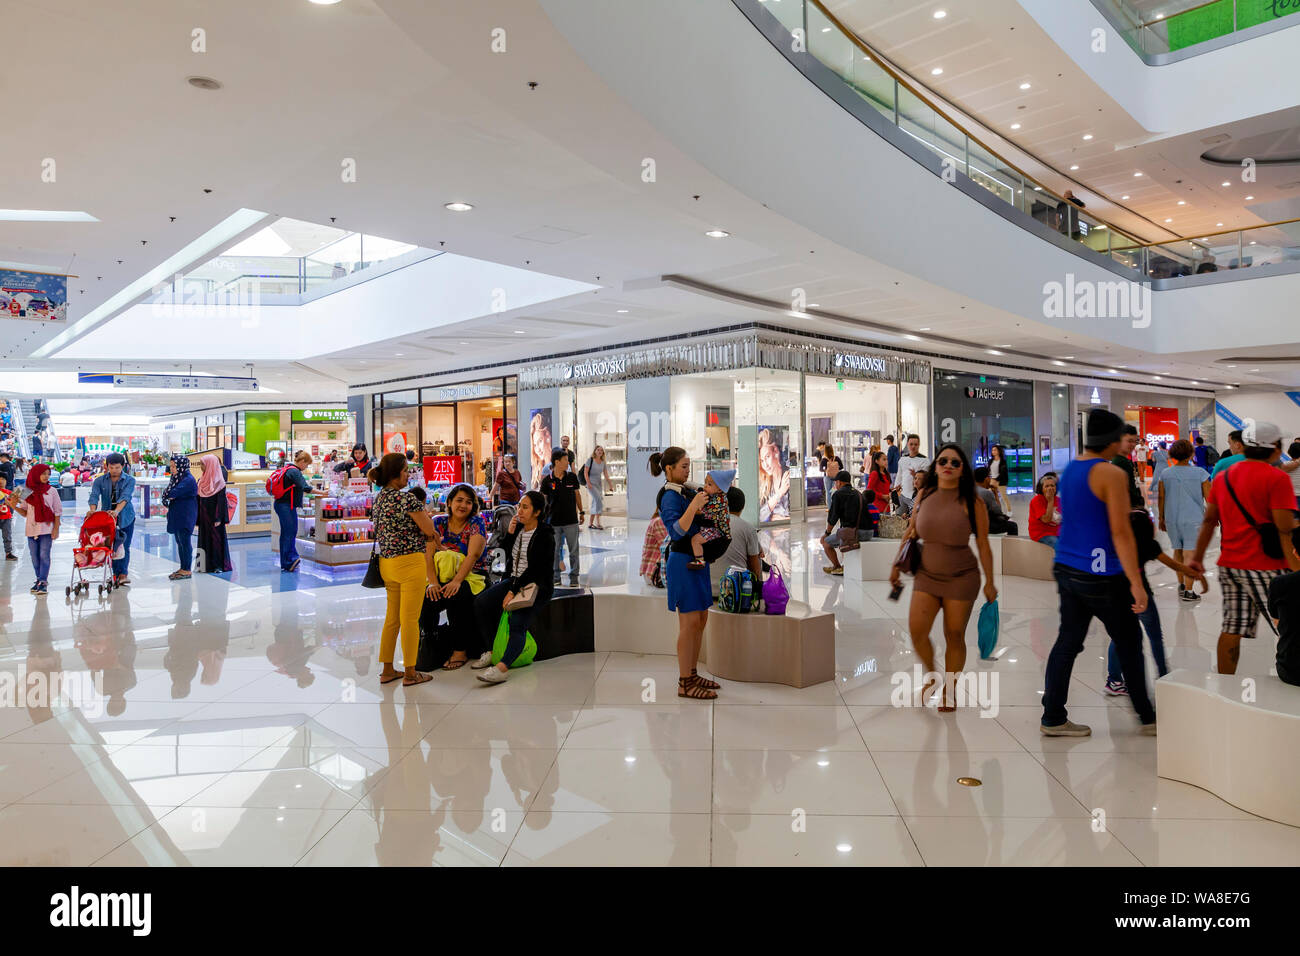 Exclusive Shops Inside The Mall Of Asia Shopping Mall, Manila, The Philippines Stock Photo